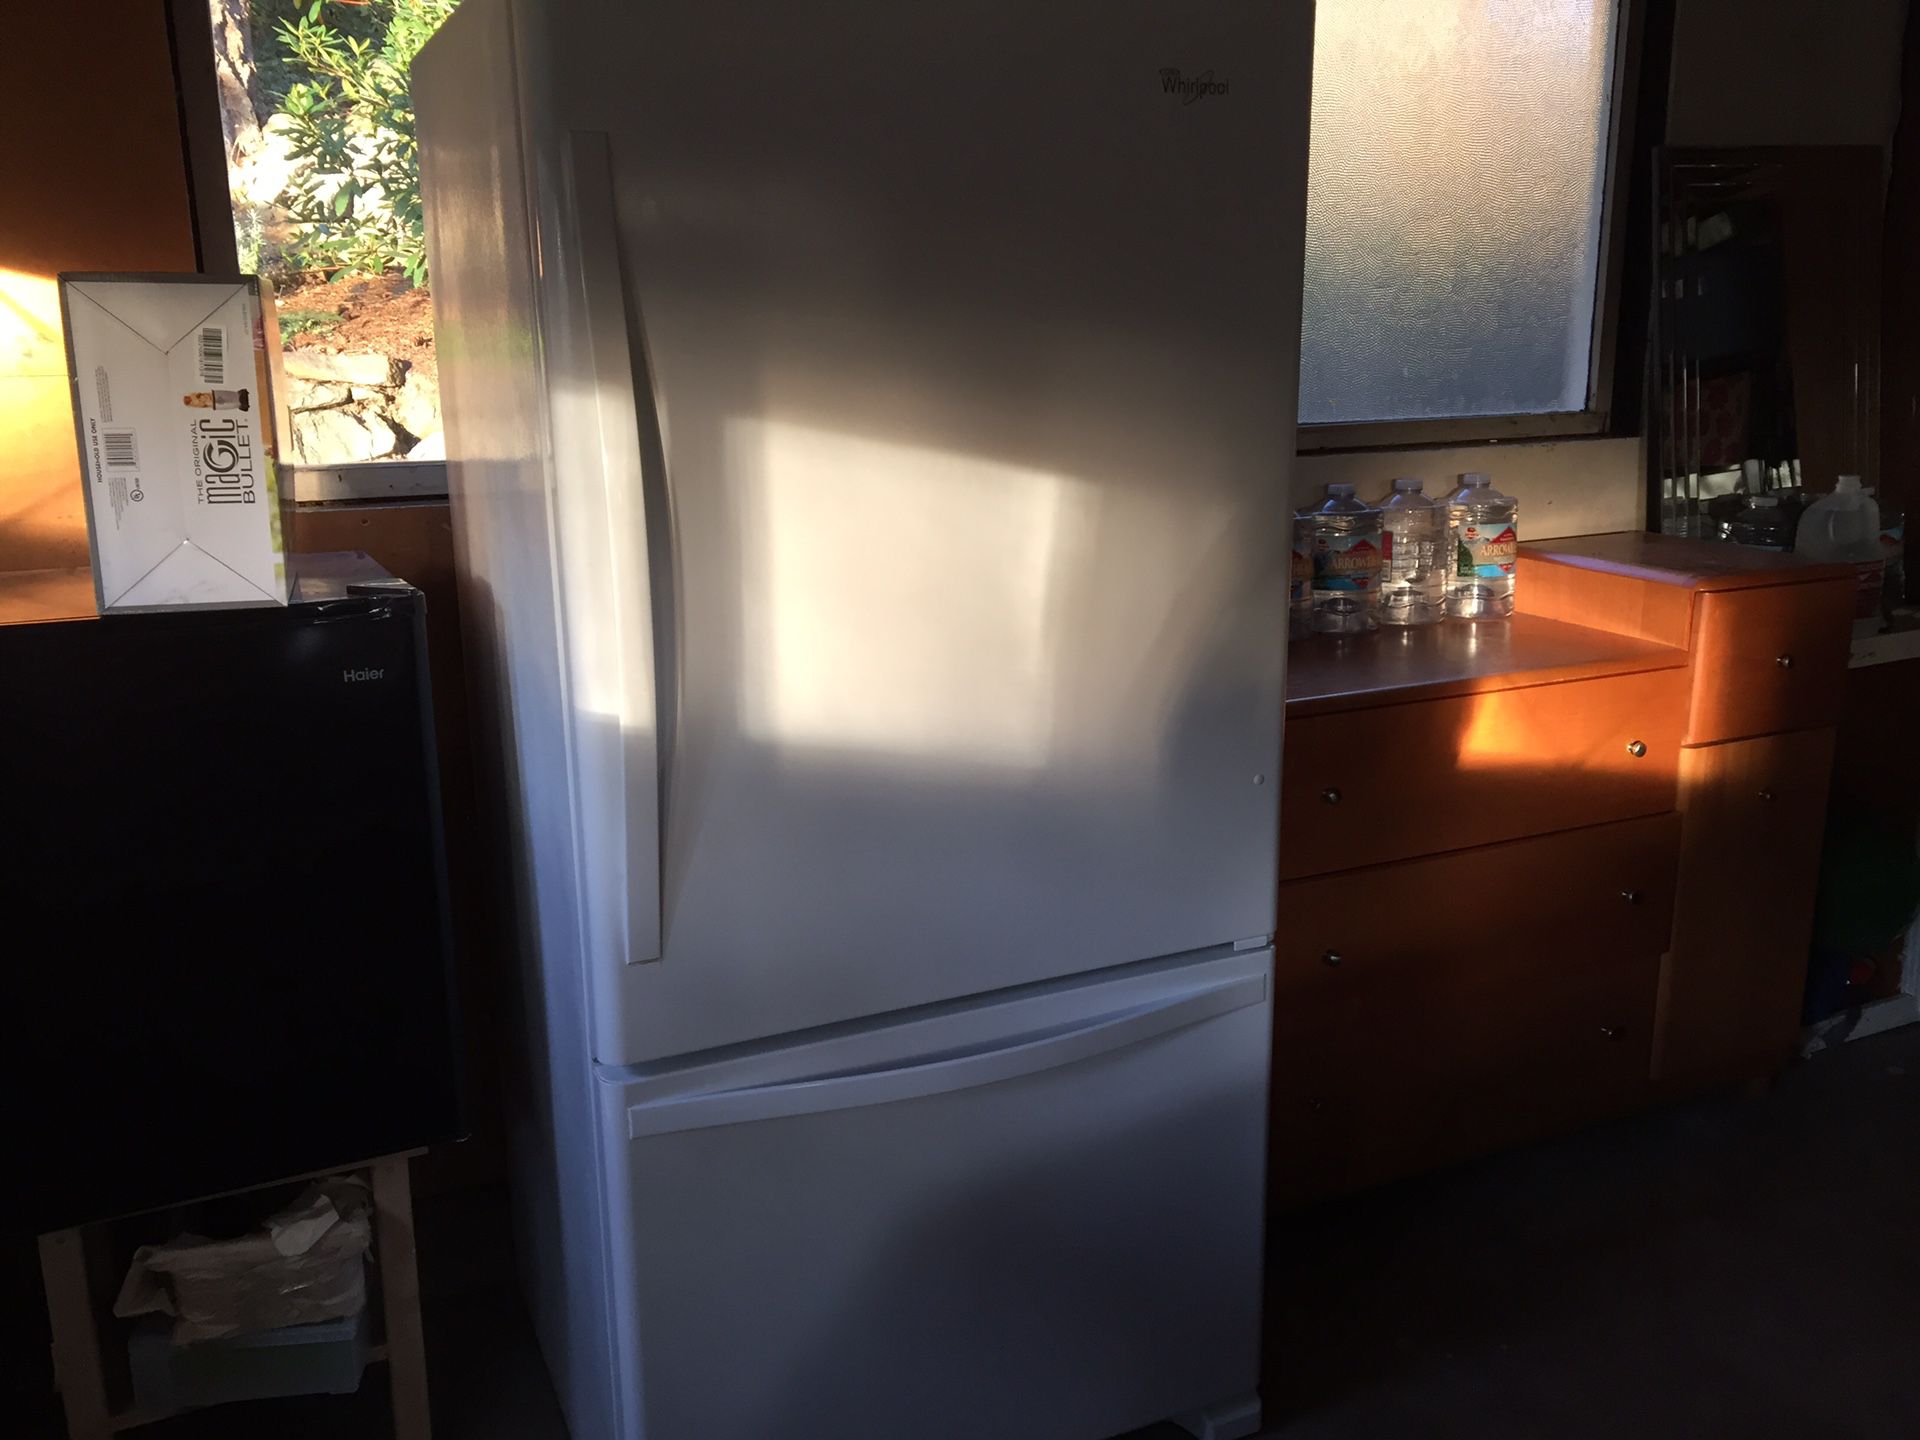 Whirlpool 25 cu ft. refrigerator. Immaculate, in perfect, practically new condition. Reply to Annette. Asking $800.00. Will consider o